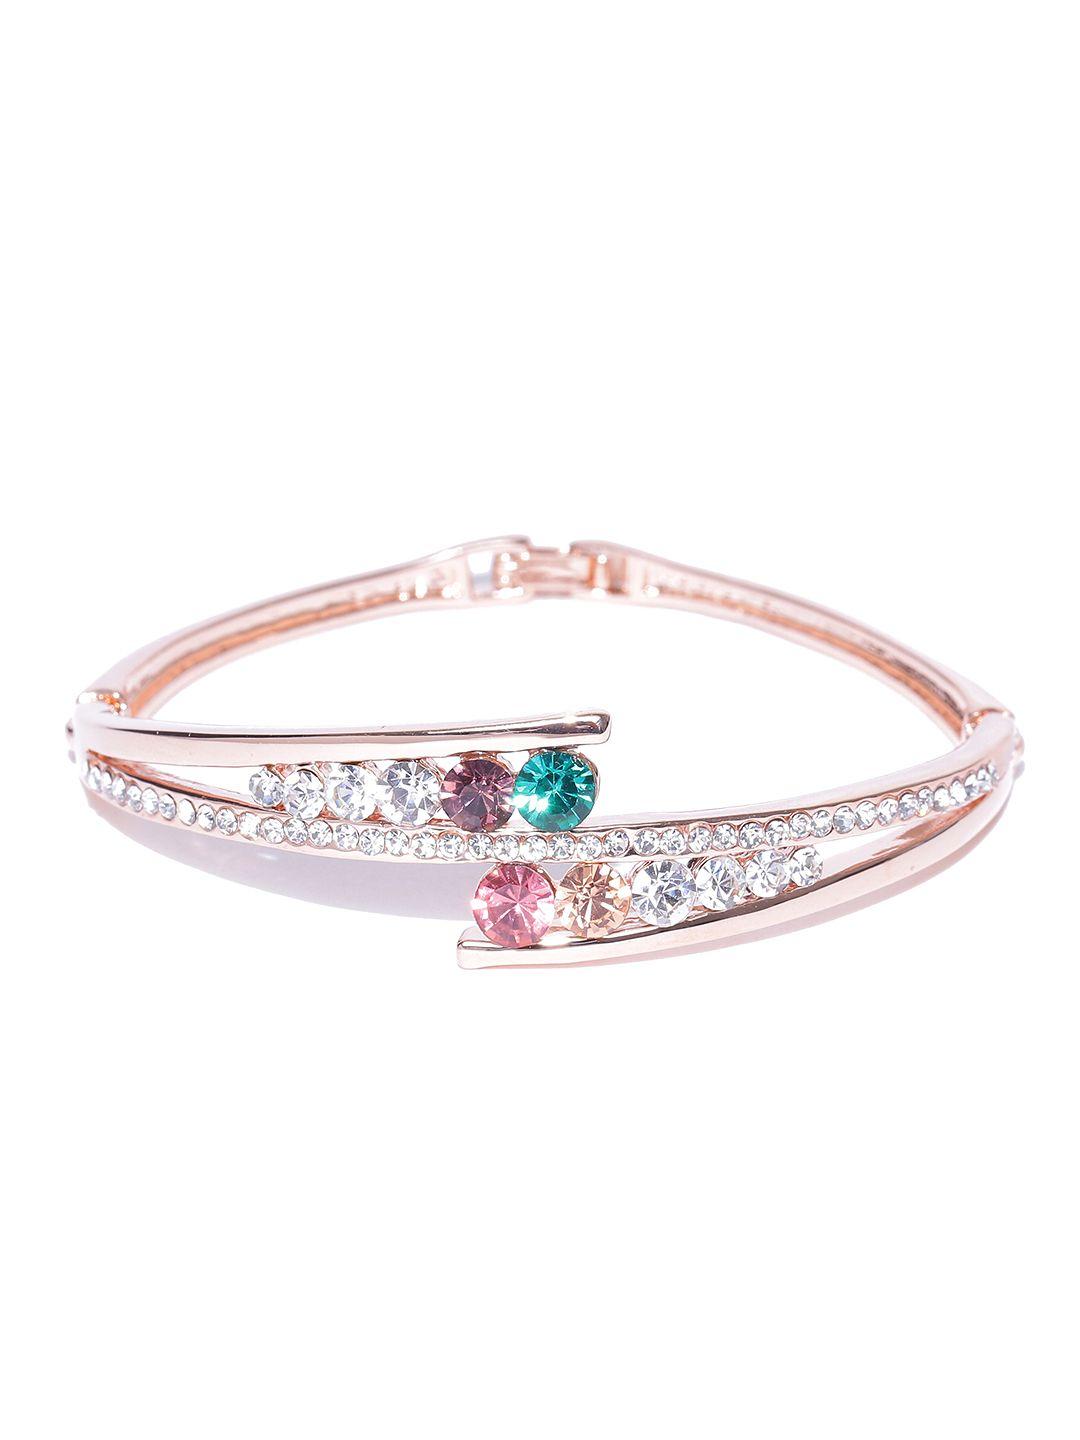 jewels galaxy rose gold-plated handcrafted cz stone-studded bangle-style bracelet